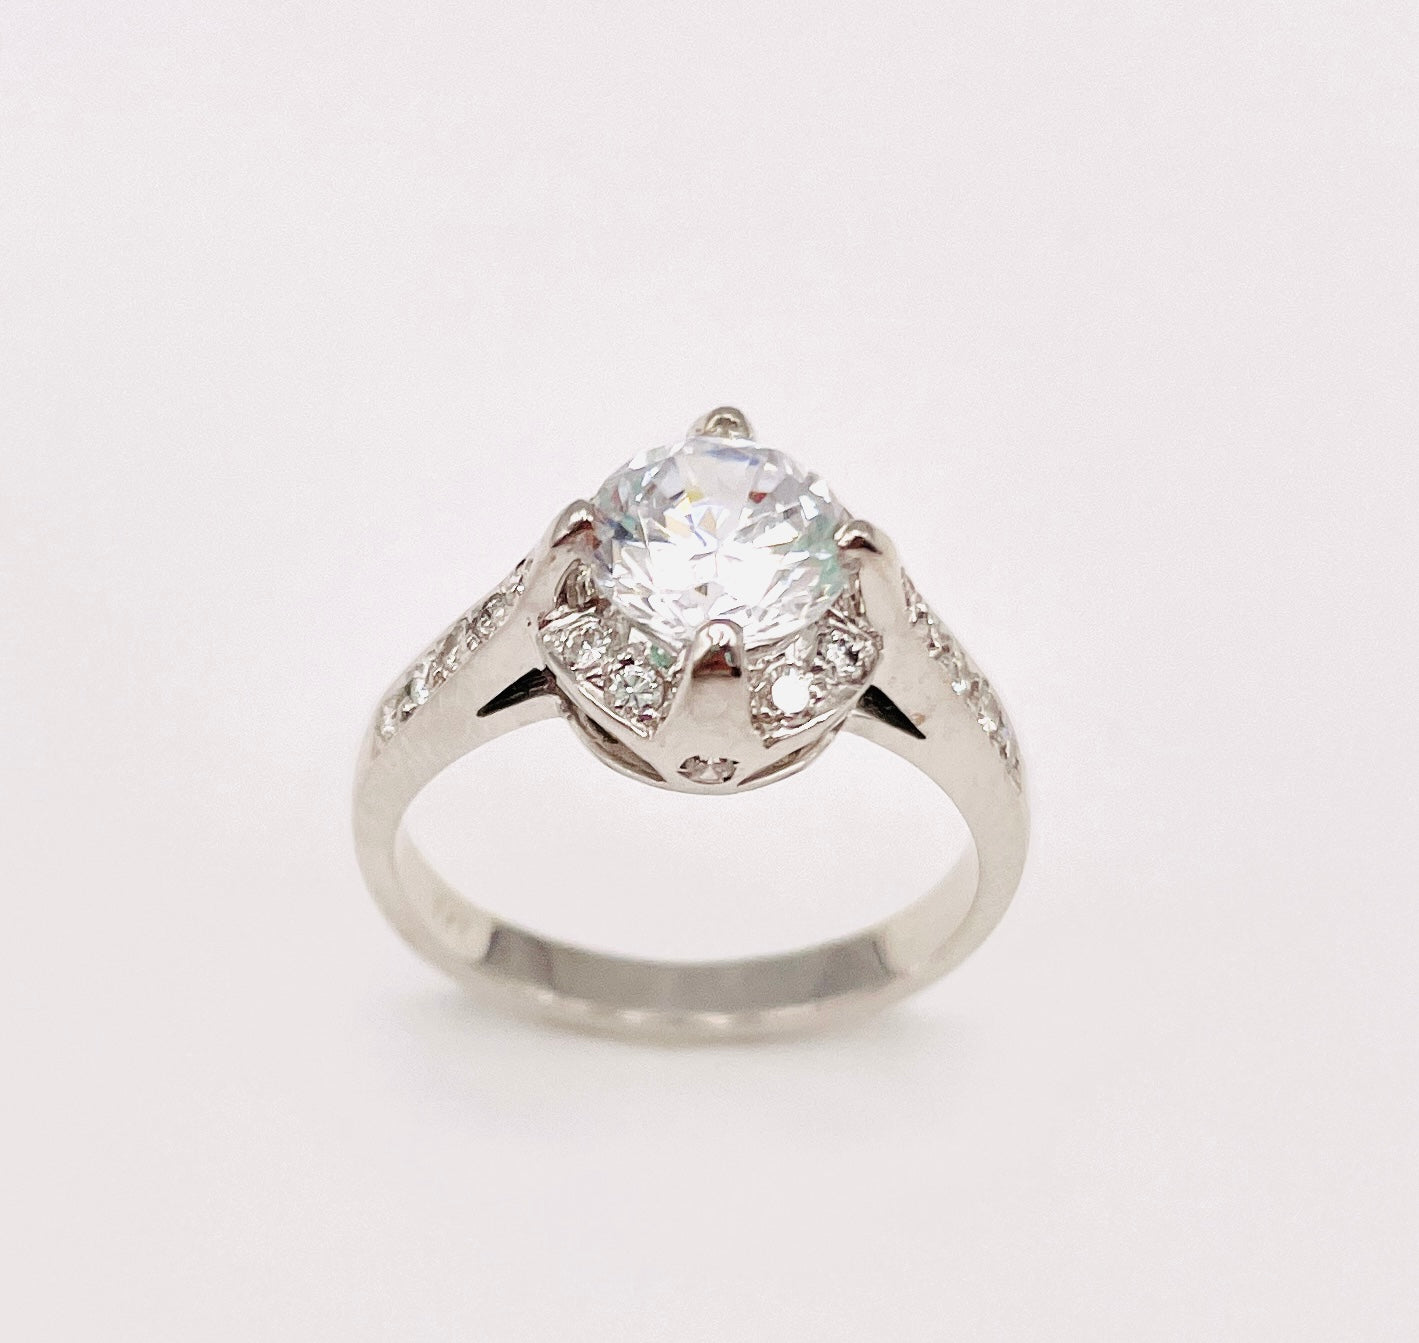 18 Karat White Gold Engagement Ring - Le Vive Jewelry in Riverside